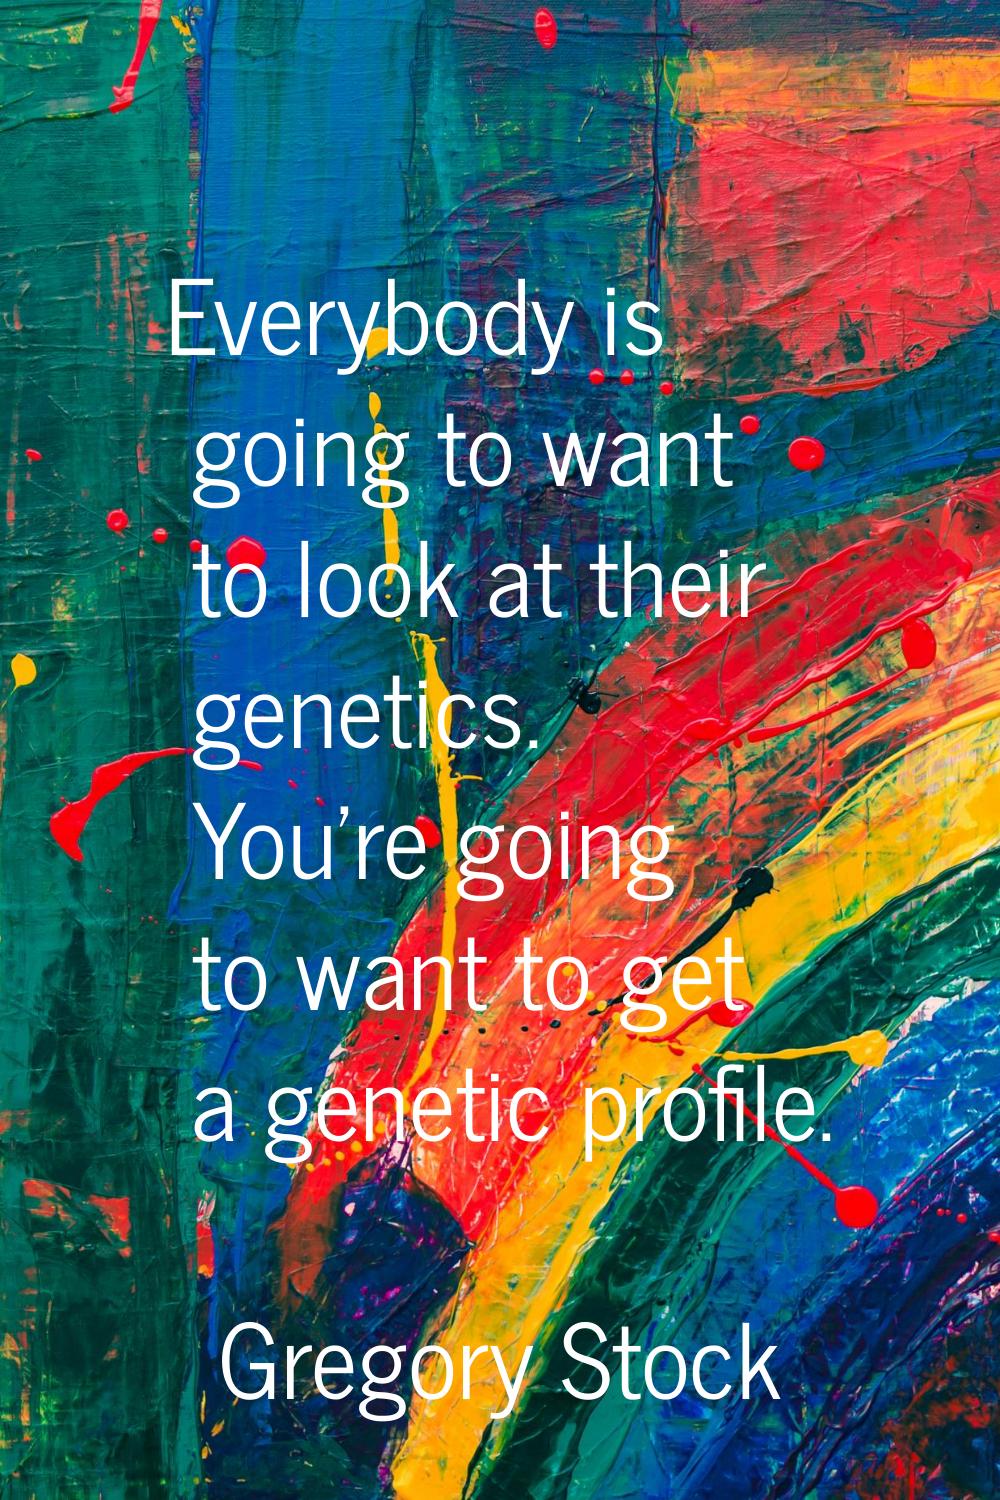 Everybody is going to want to look at their genetics. You're going to want to get a genetic profile